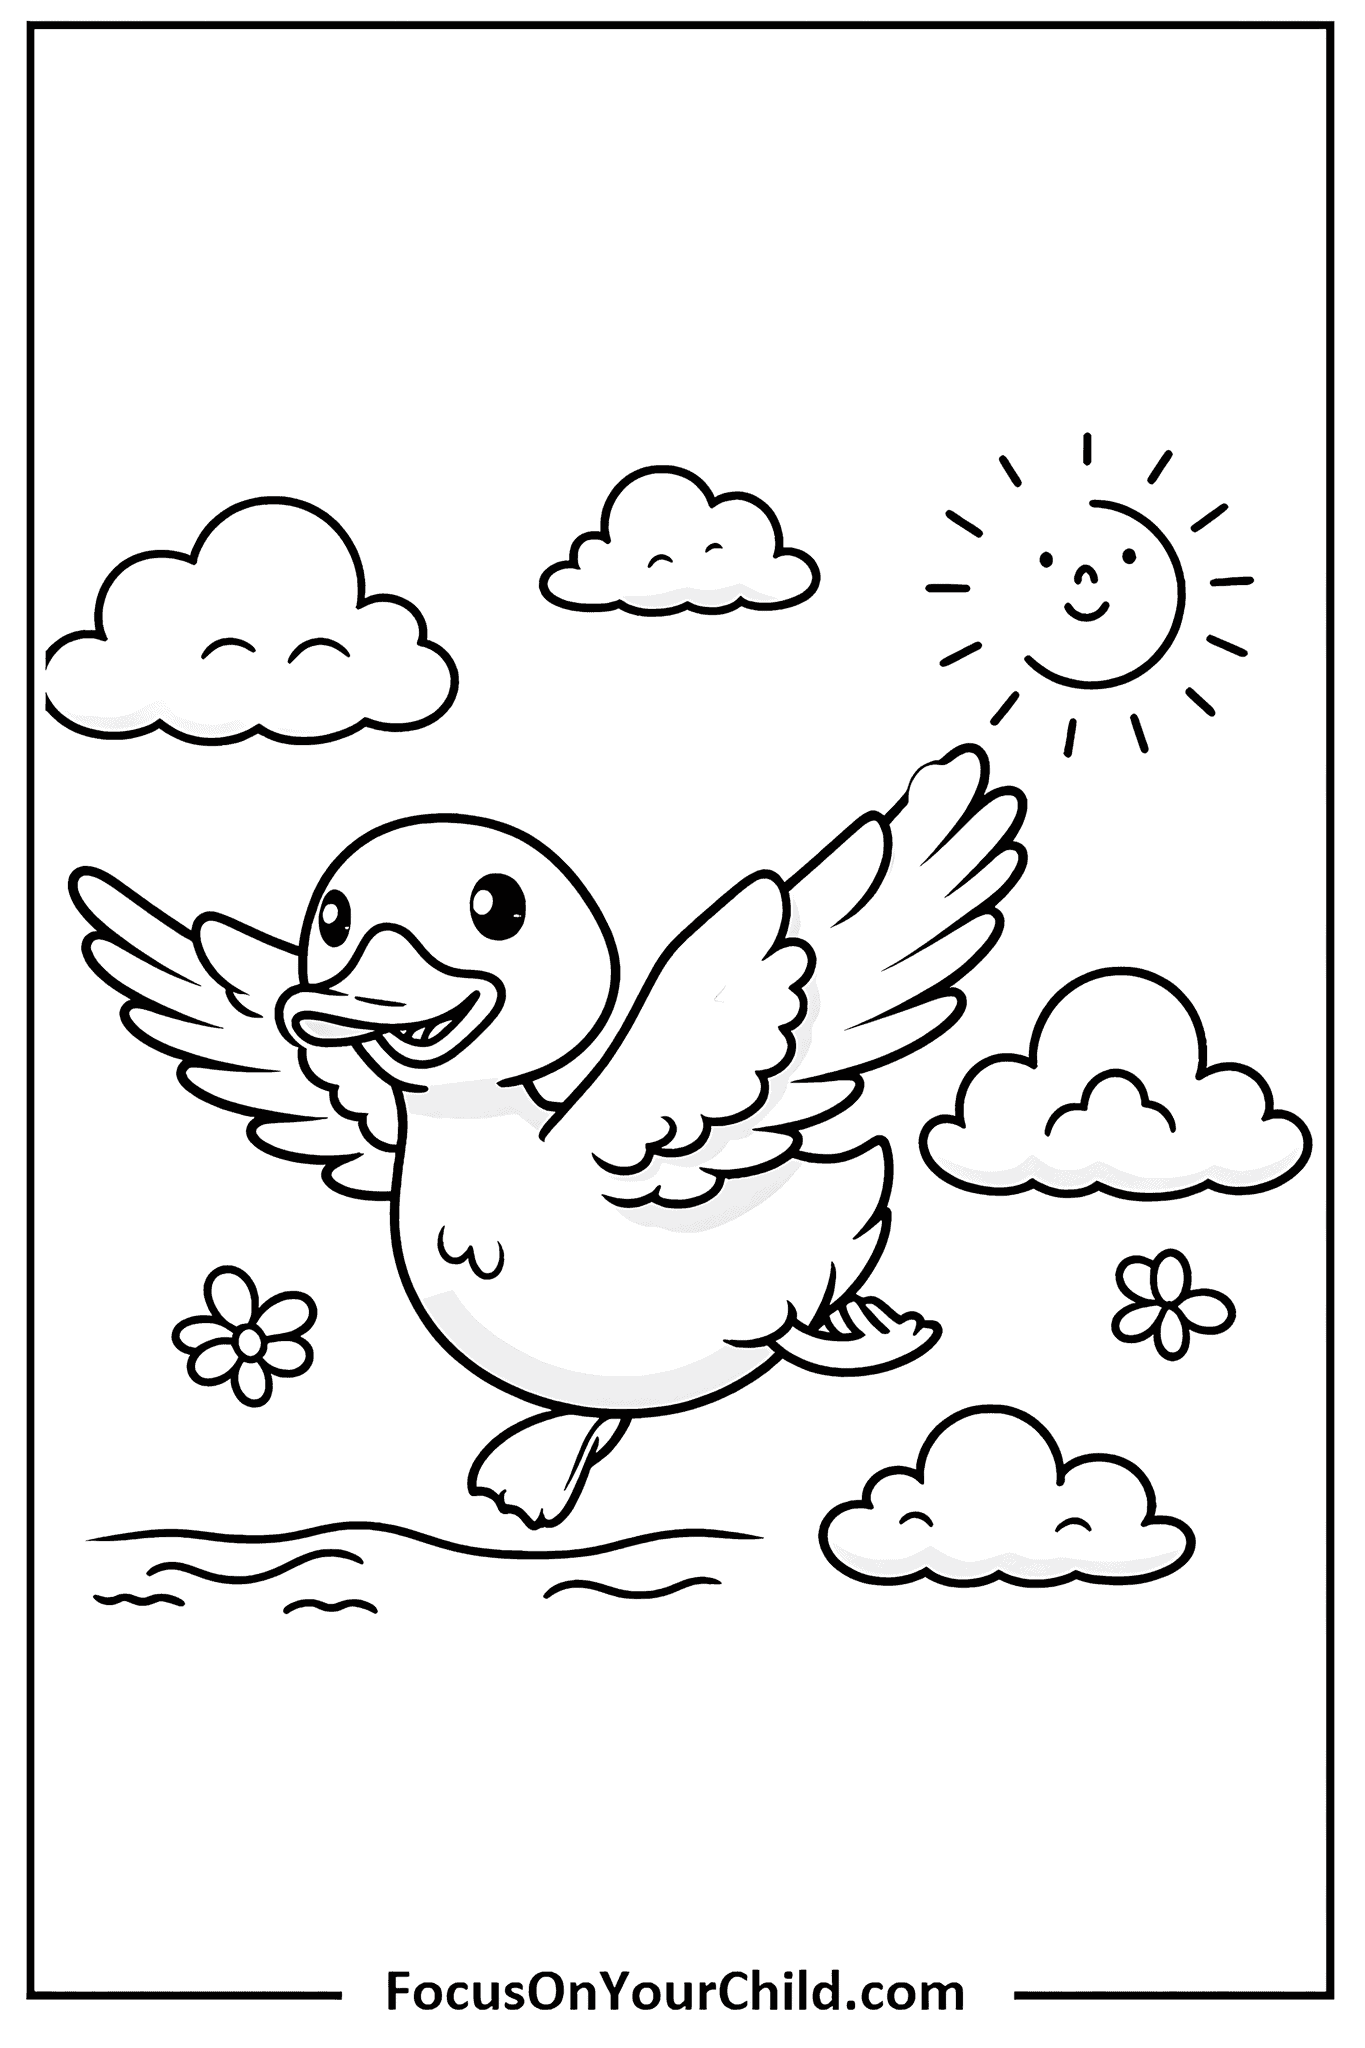 Cheerful duck flying under the sun in a coloring book page.